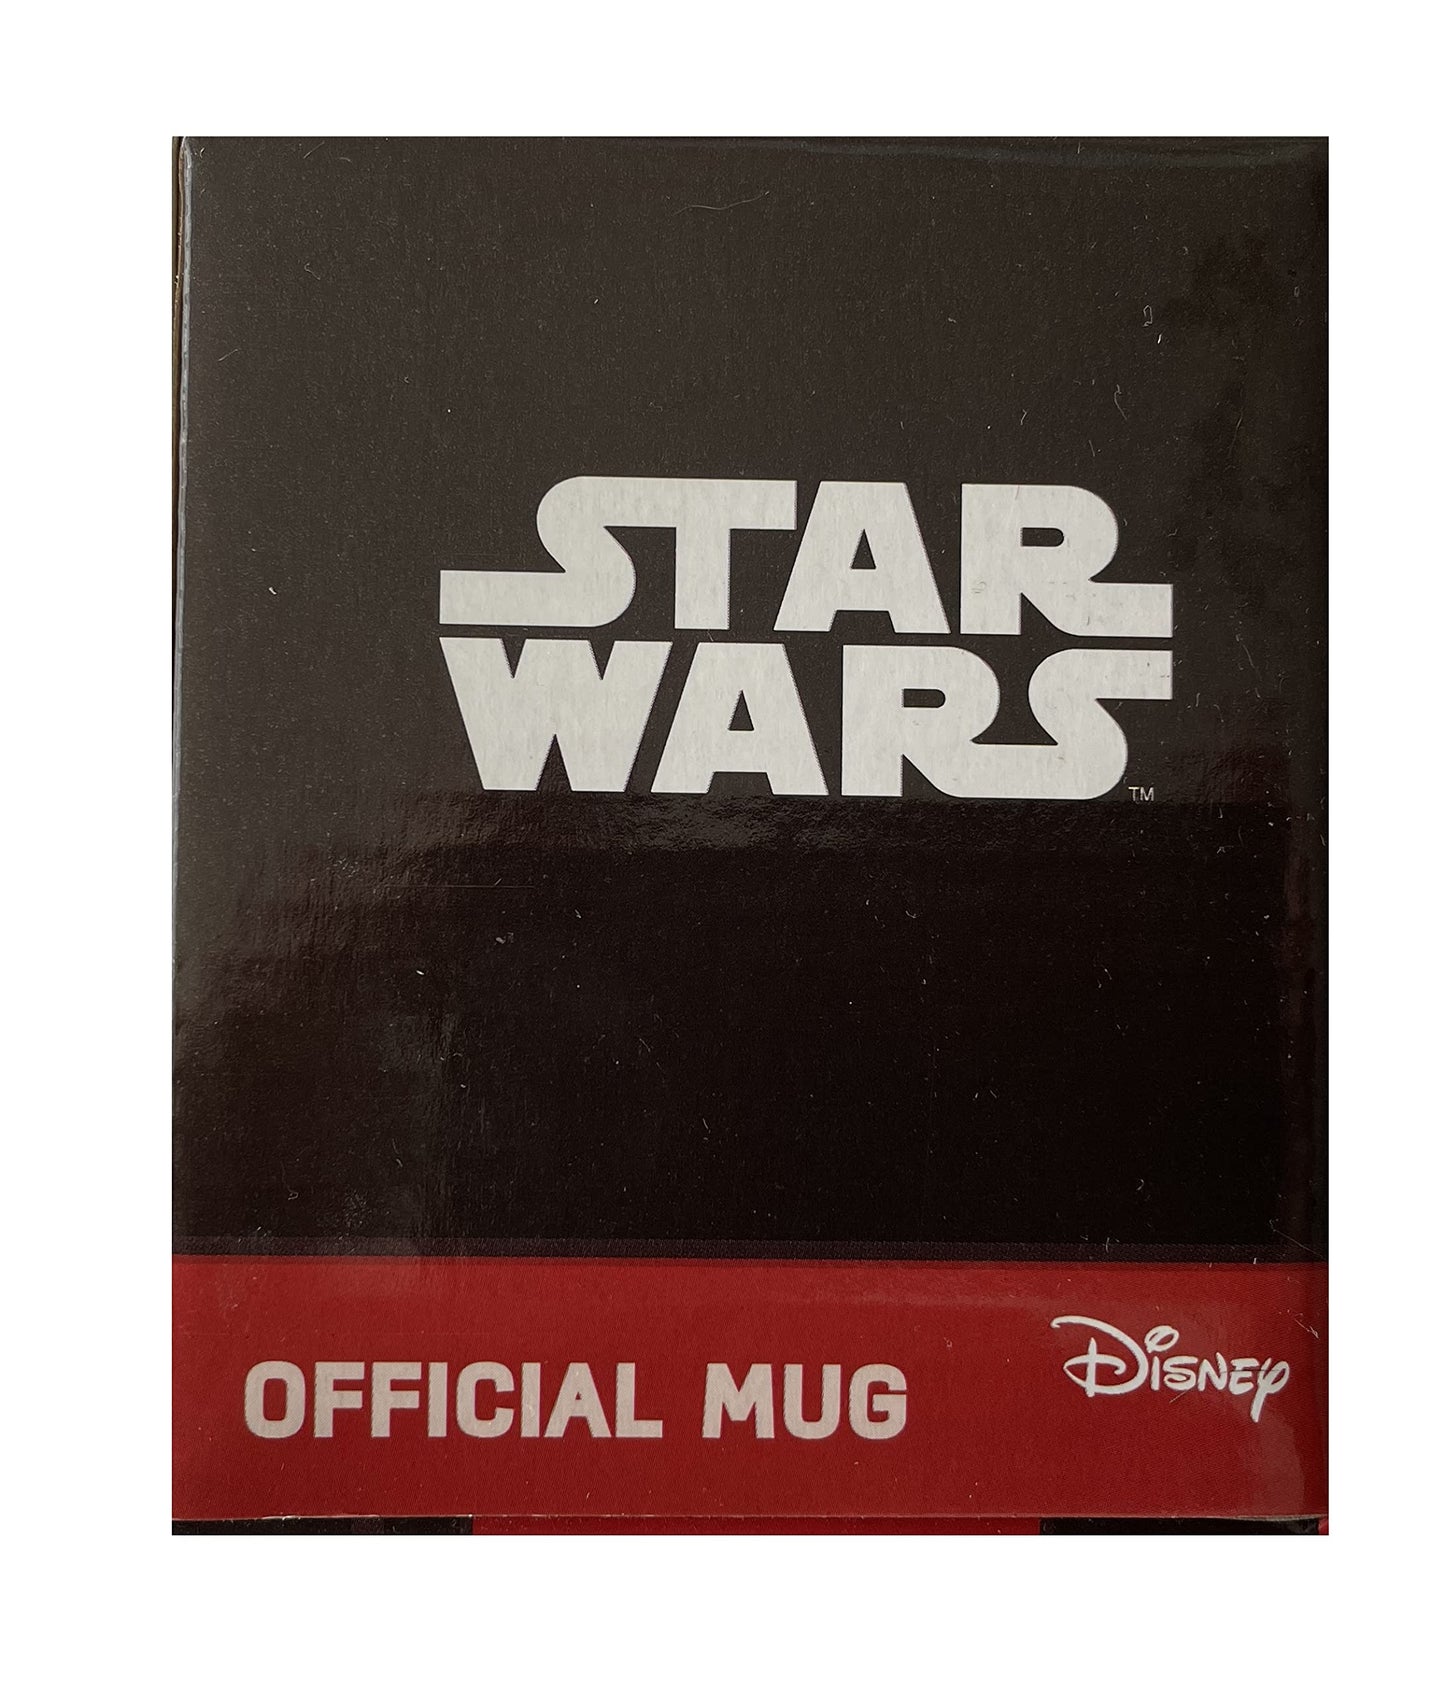 Star Wars 2015 The Force Awakens - The Droids 330ml Ceramic Mug - Brand New Shop Stock Room Find